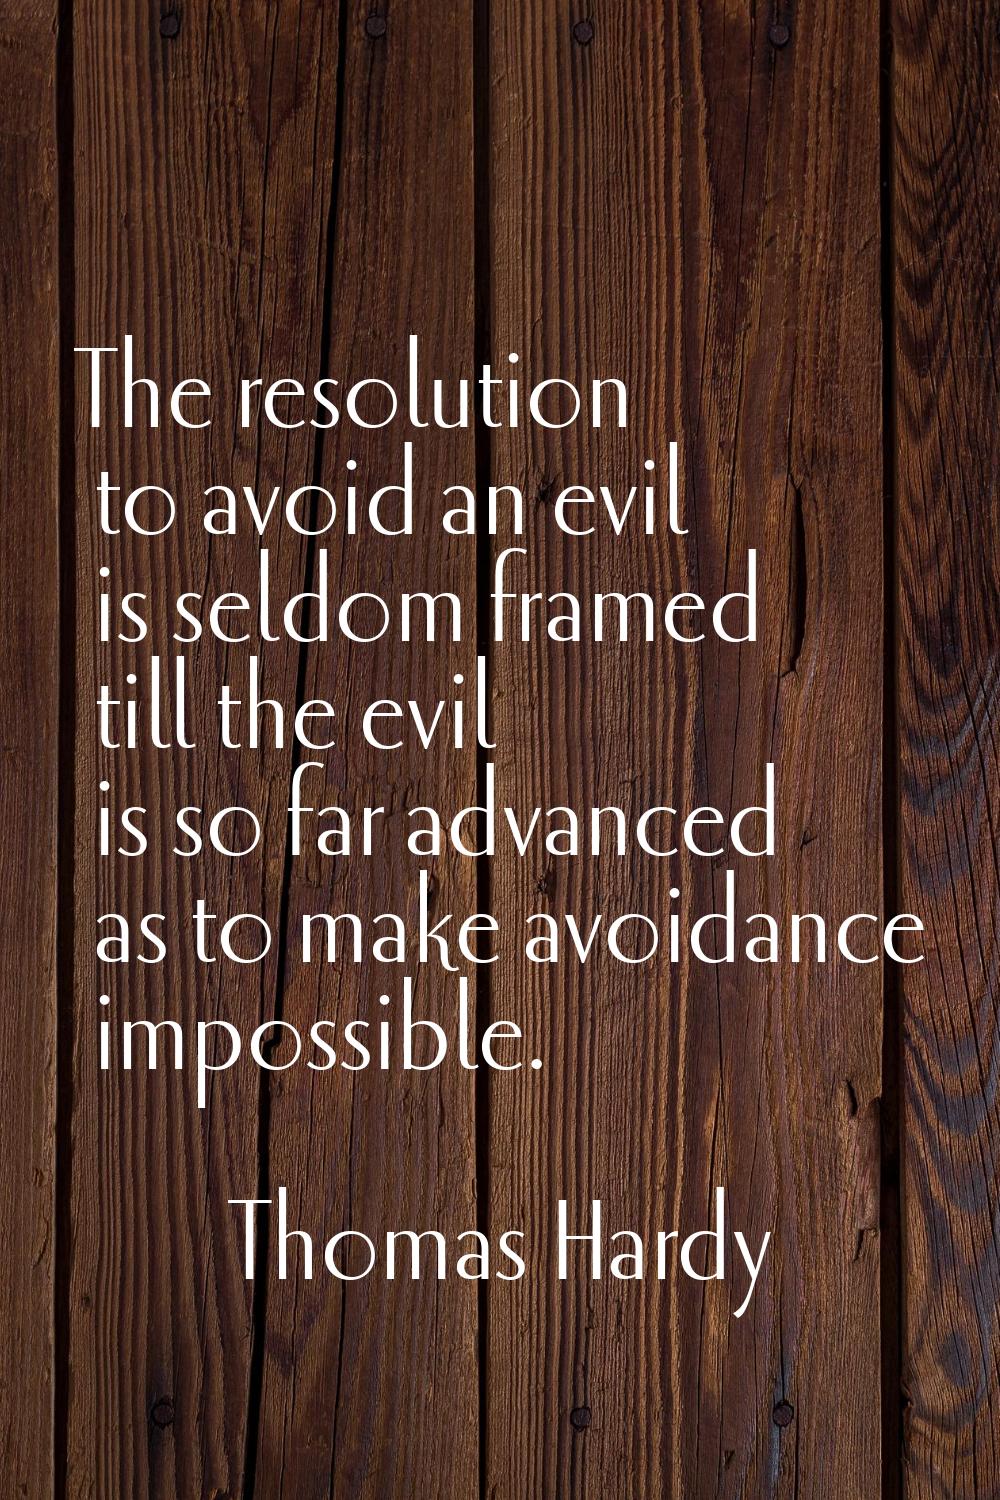 The resolution to avoid an evil is seldom framed till the evil is so far advanced as to make avoida